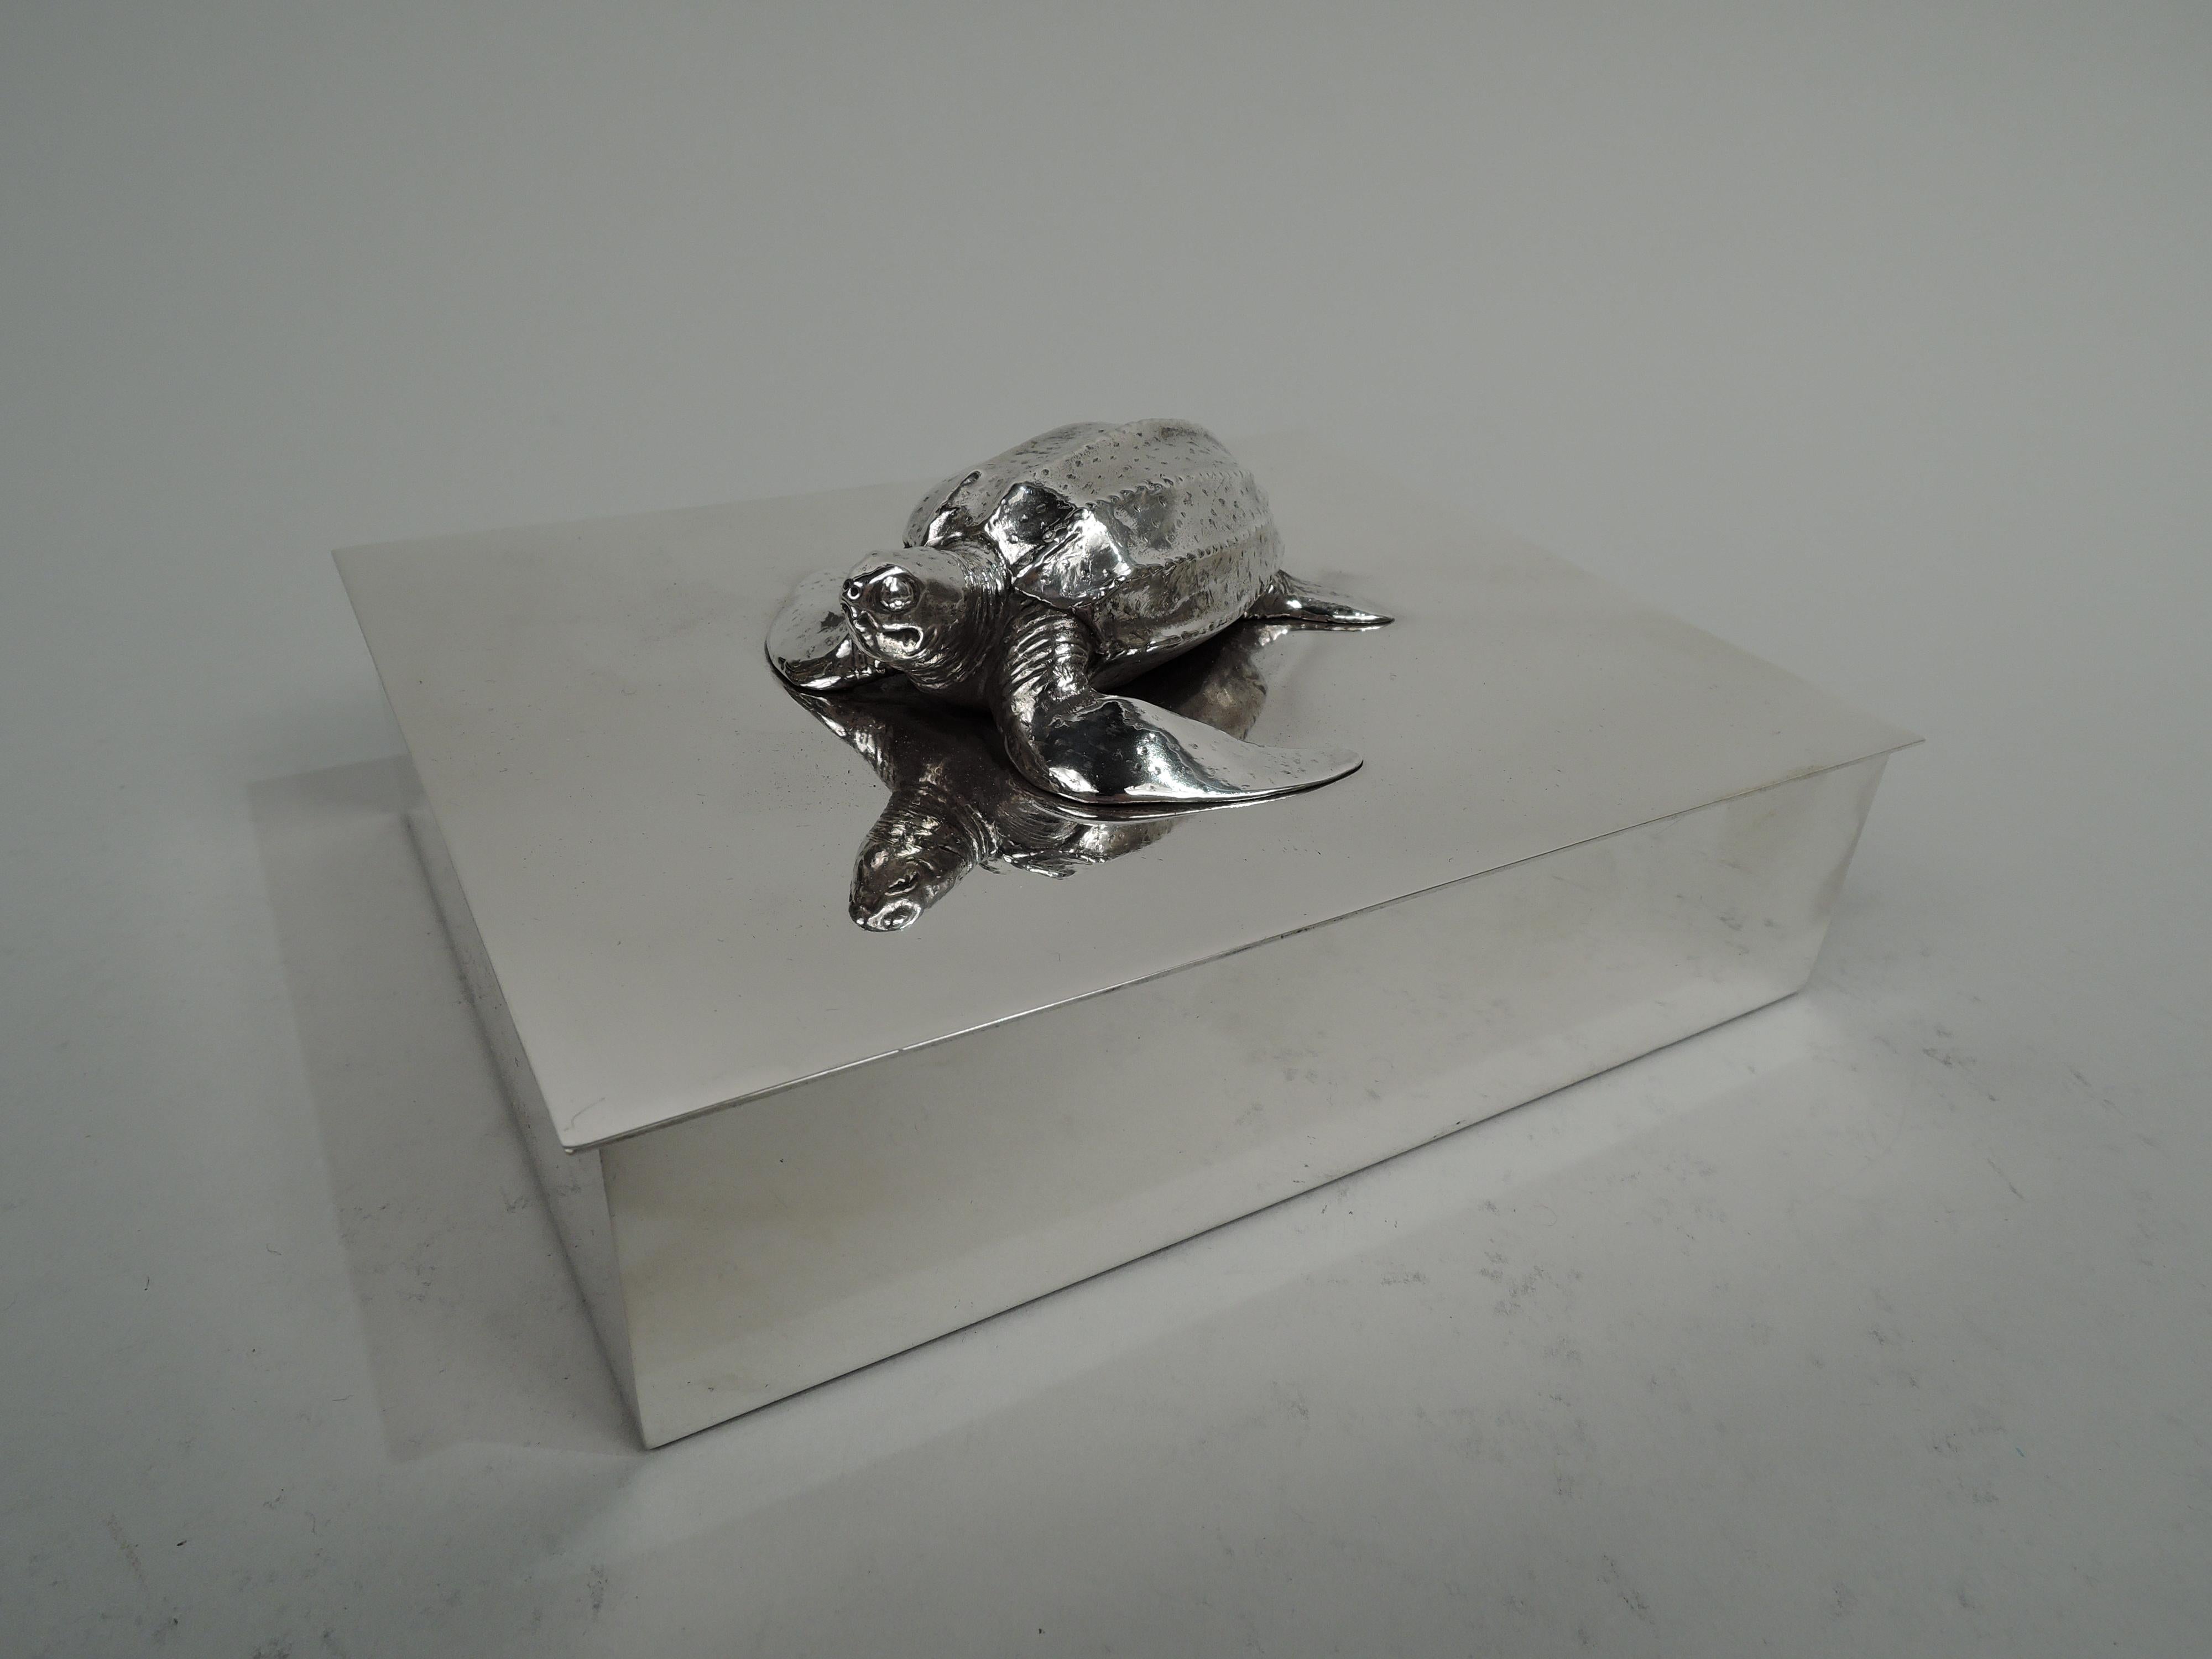 Mid-Century Modern sterling silver box. Made by Tiffany & Co. in New York. Rectangular with straight sides and crisp corners. Cover flat and hinged with slight overhang. On top is mounted cast figure of a turtle with out-stretched head and webbed